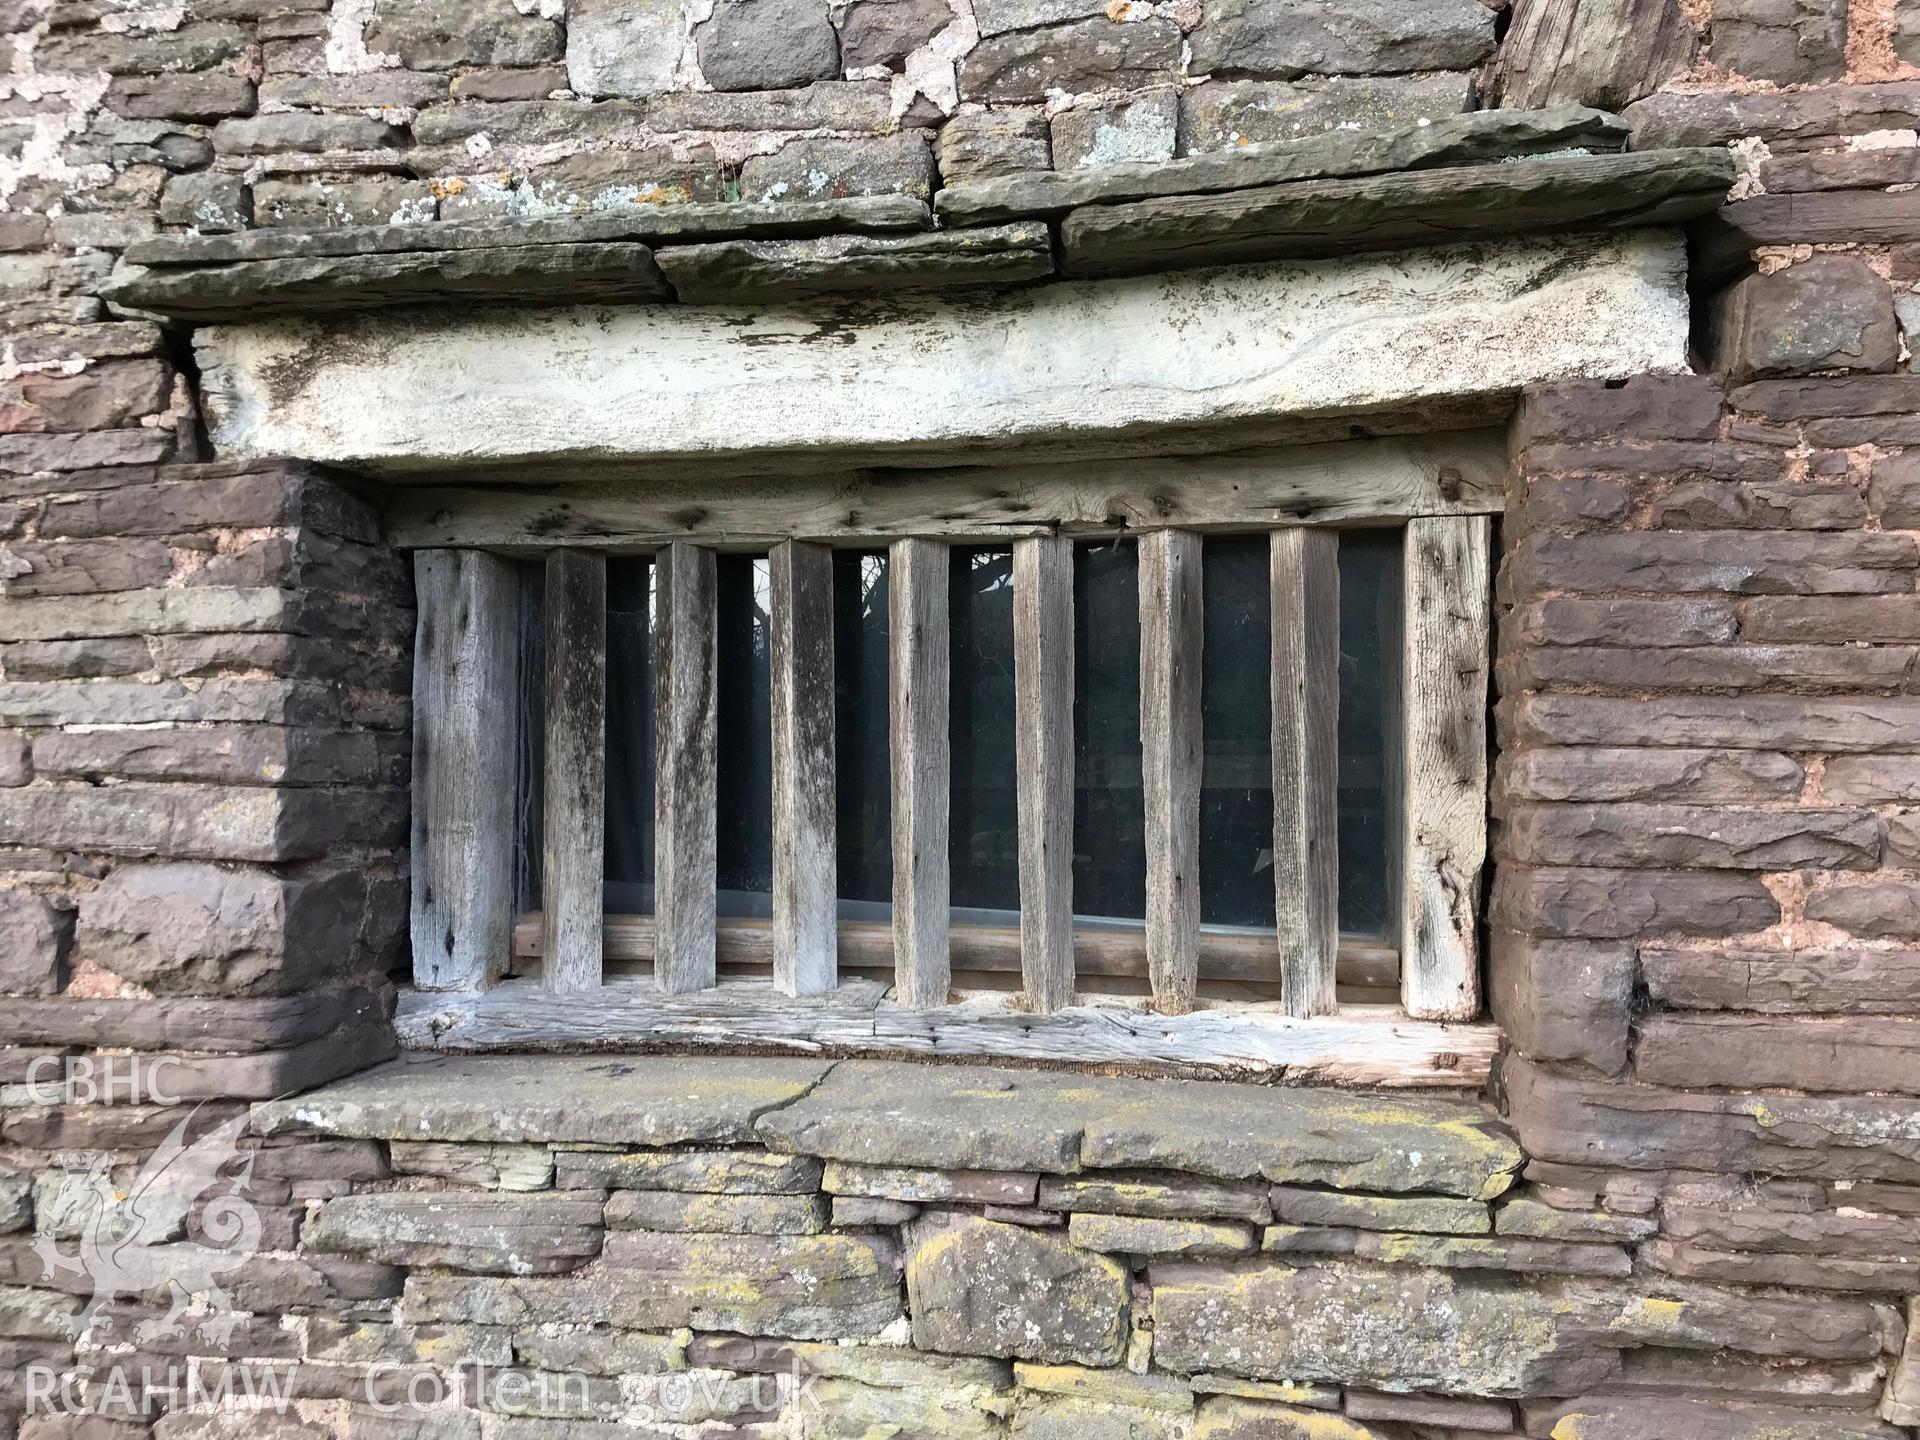 Exterior view showing detail of wooden barred window at Ty-Hwnt-y-Bwlch, Crucorney. Colour photograph taken by Paul R. Davis on 1st January 2019.